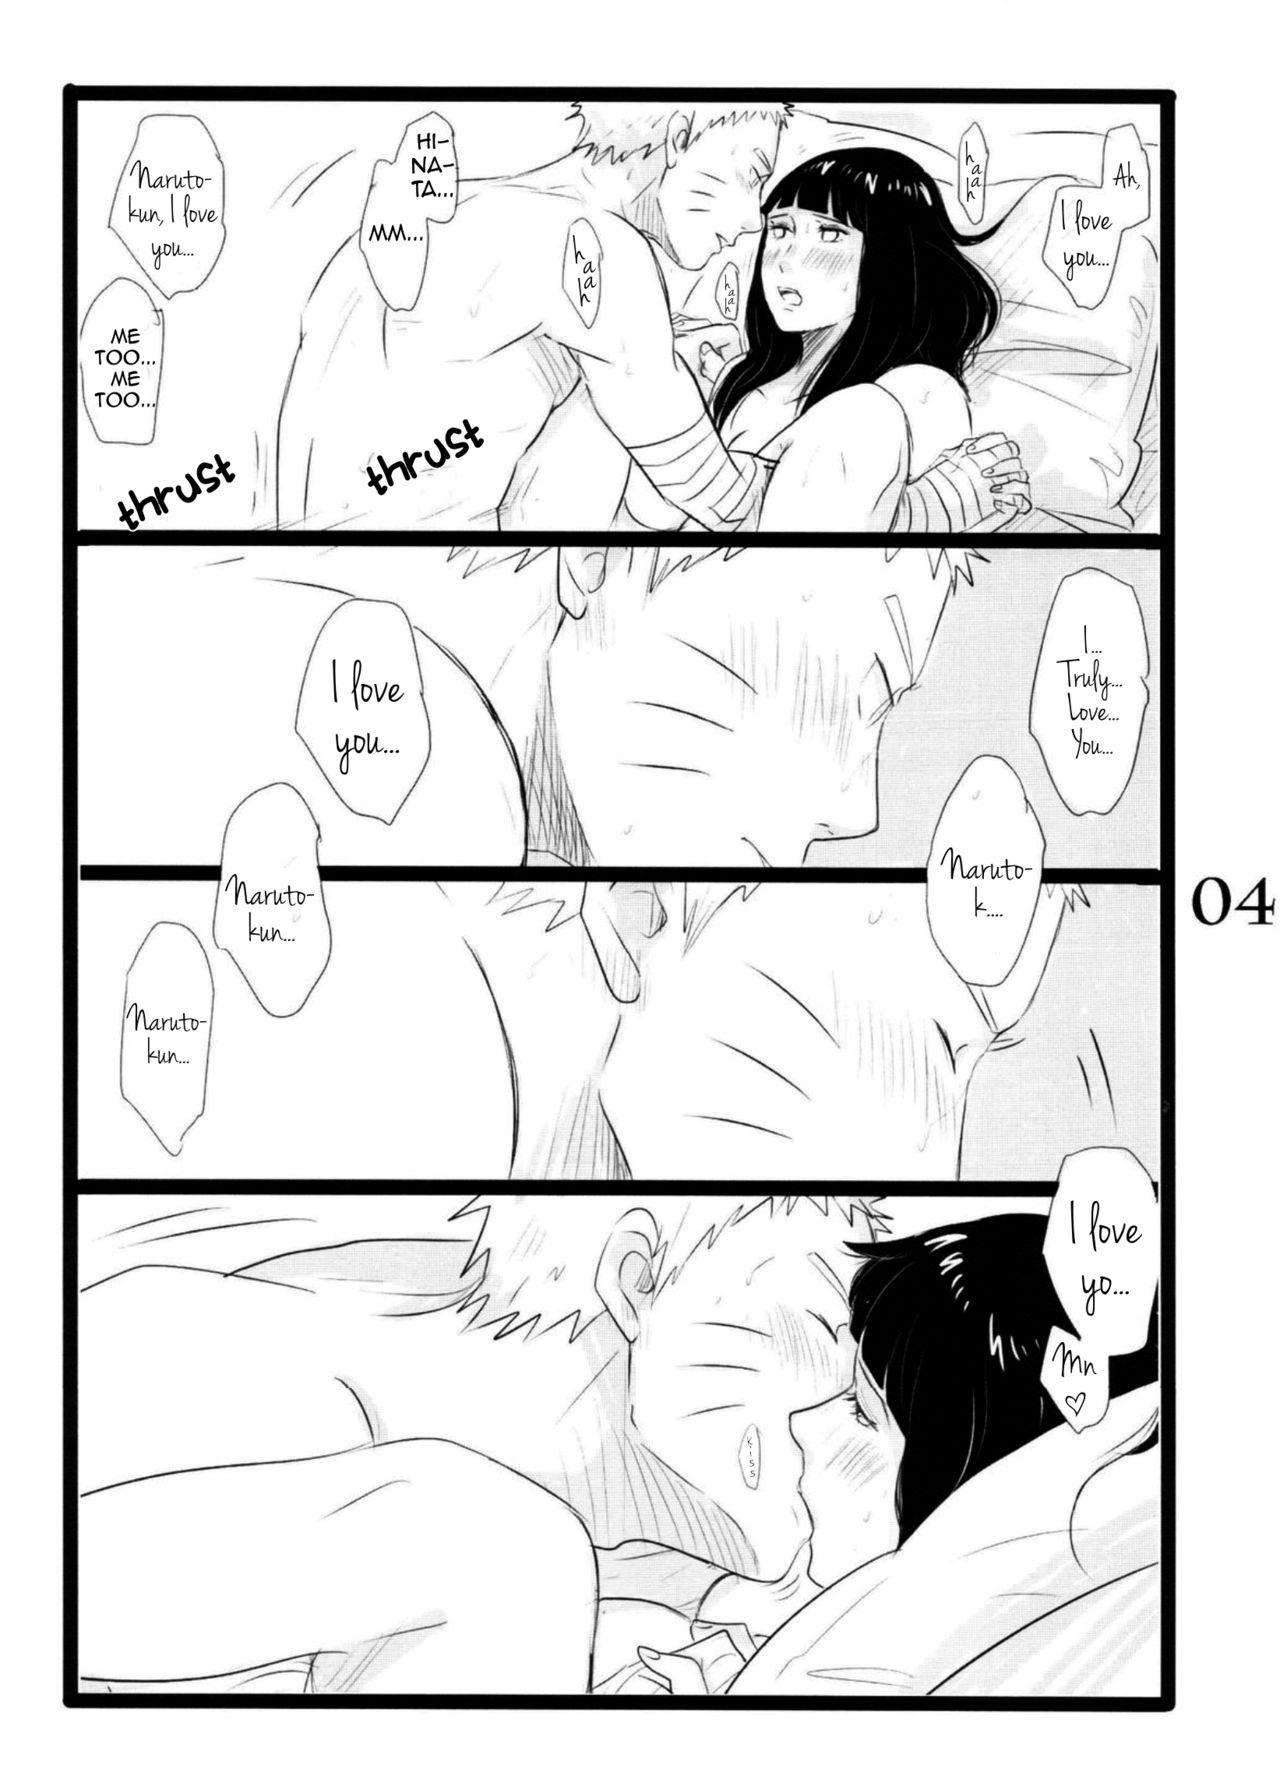 Amature Porn YOUR MY SWEET - I LOVE YOU DARLING - Naruto Fantasy - Page 5